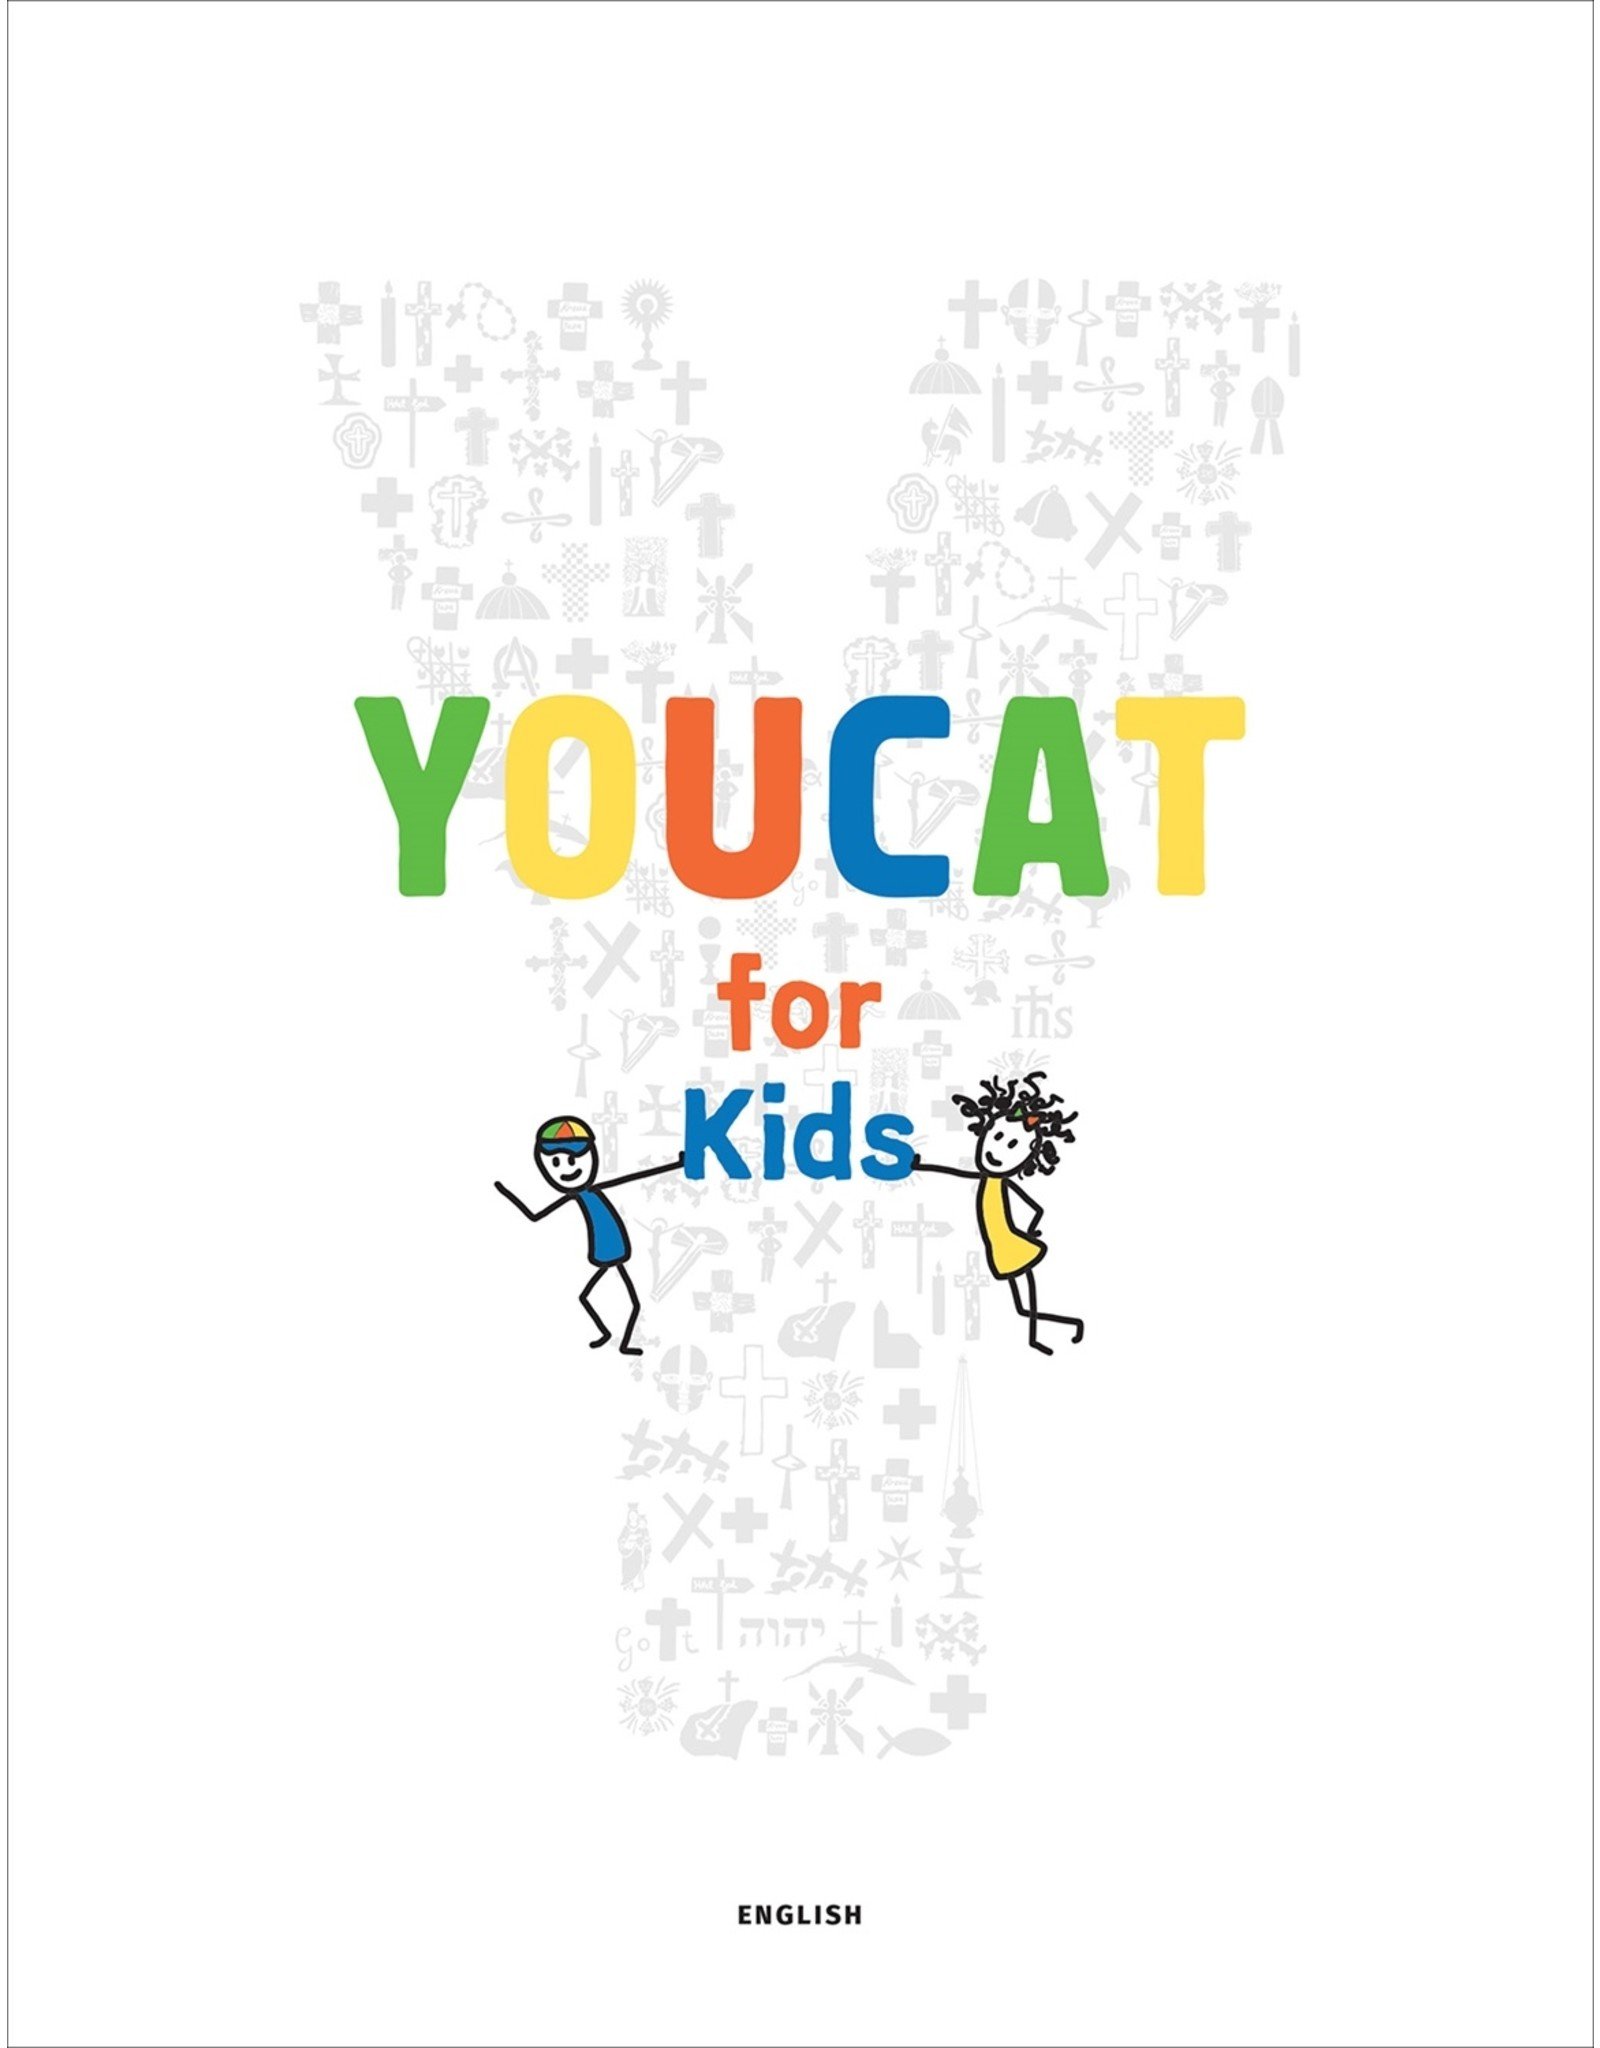 YOUCAT (Youth Catechism of the Catholic Church) for Kids